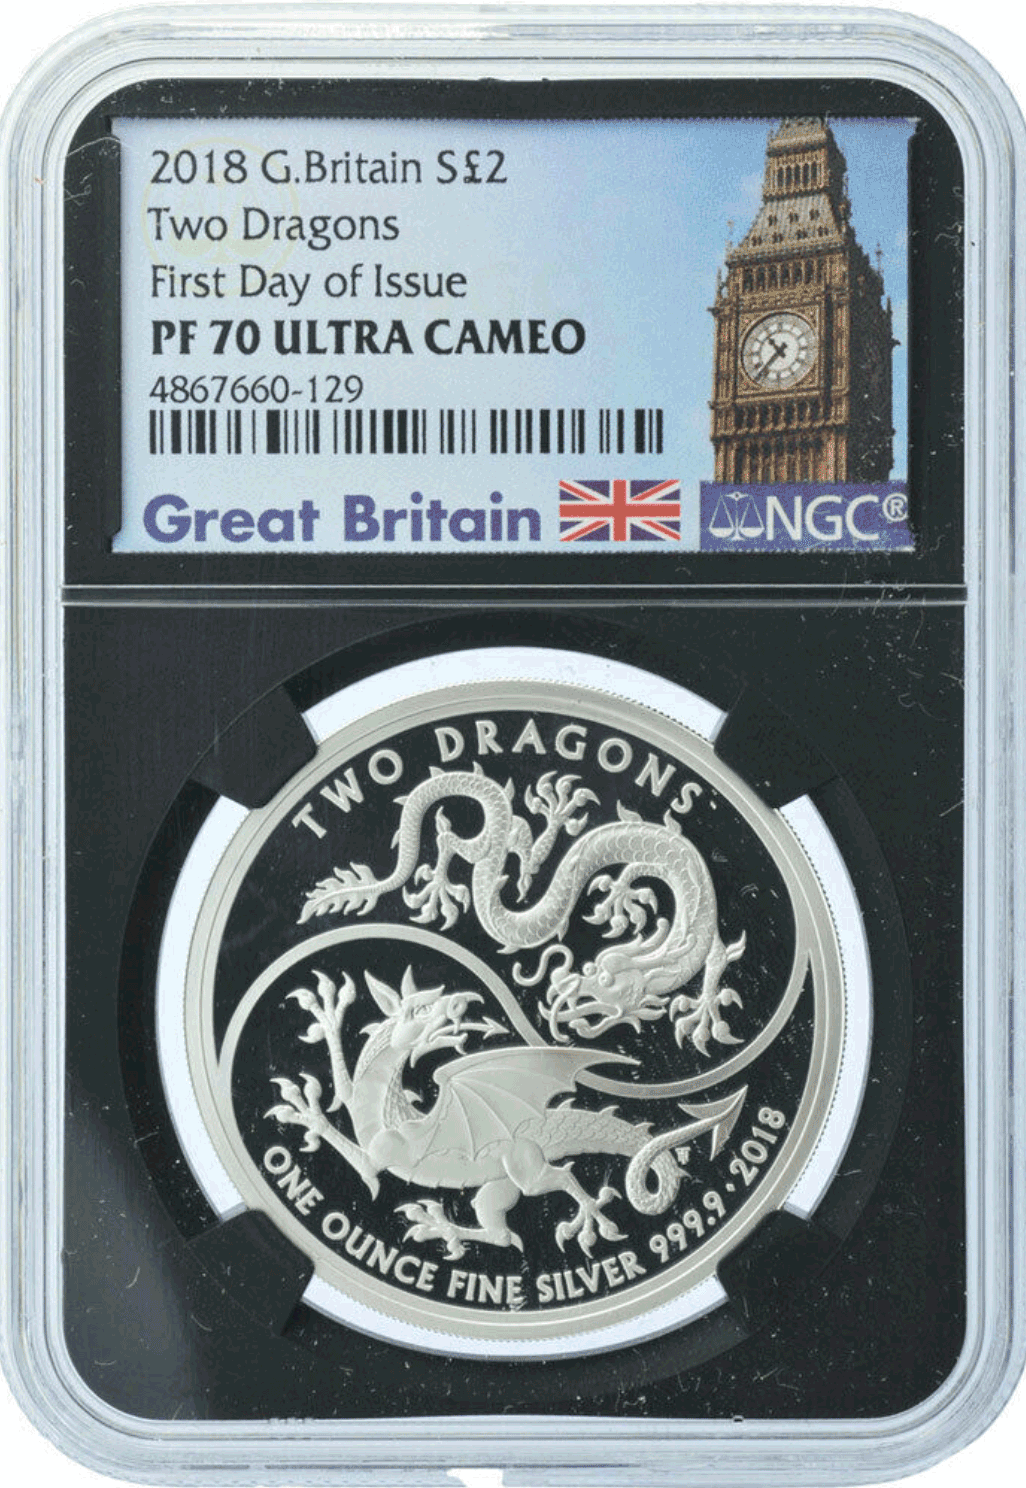 2018-Two-Dragons-Silver-Proof-1oz